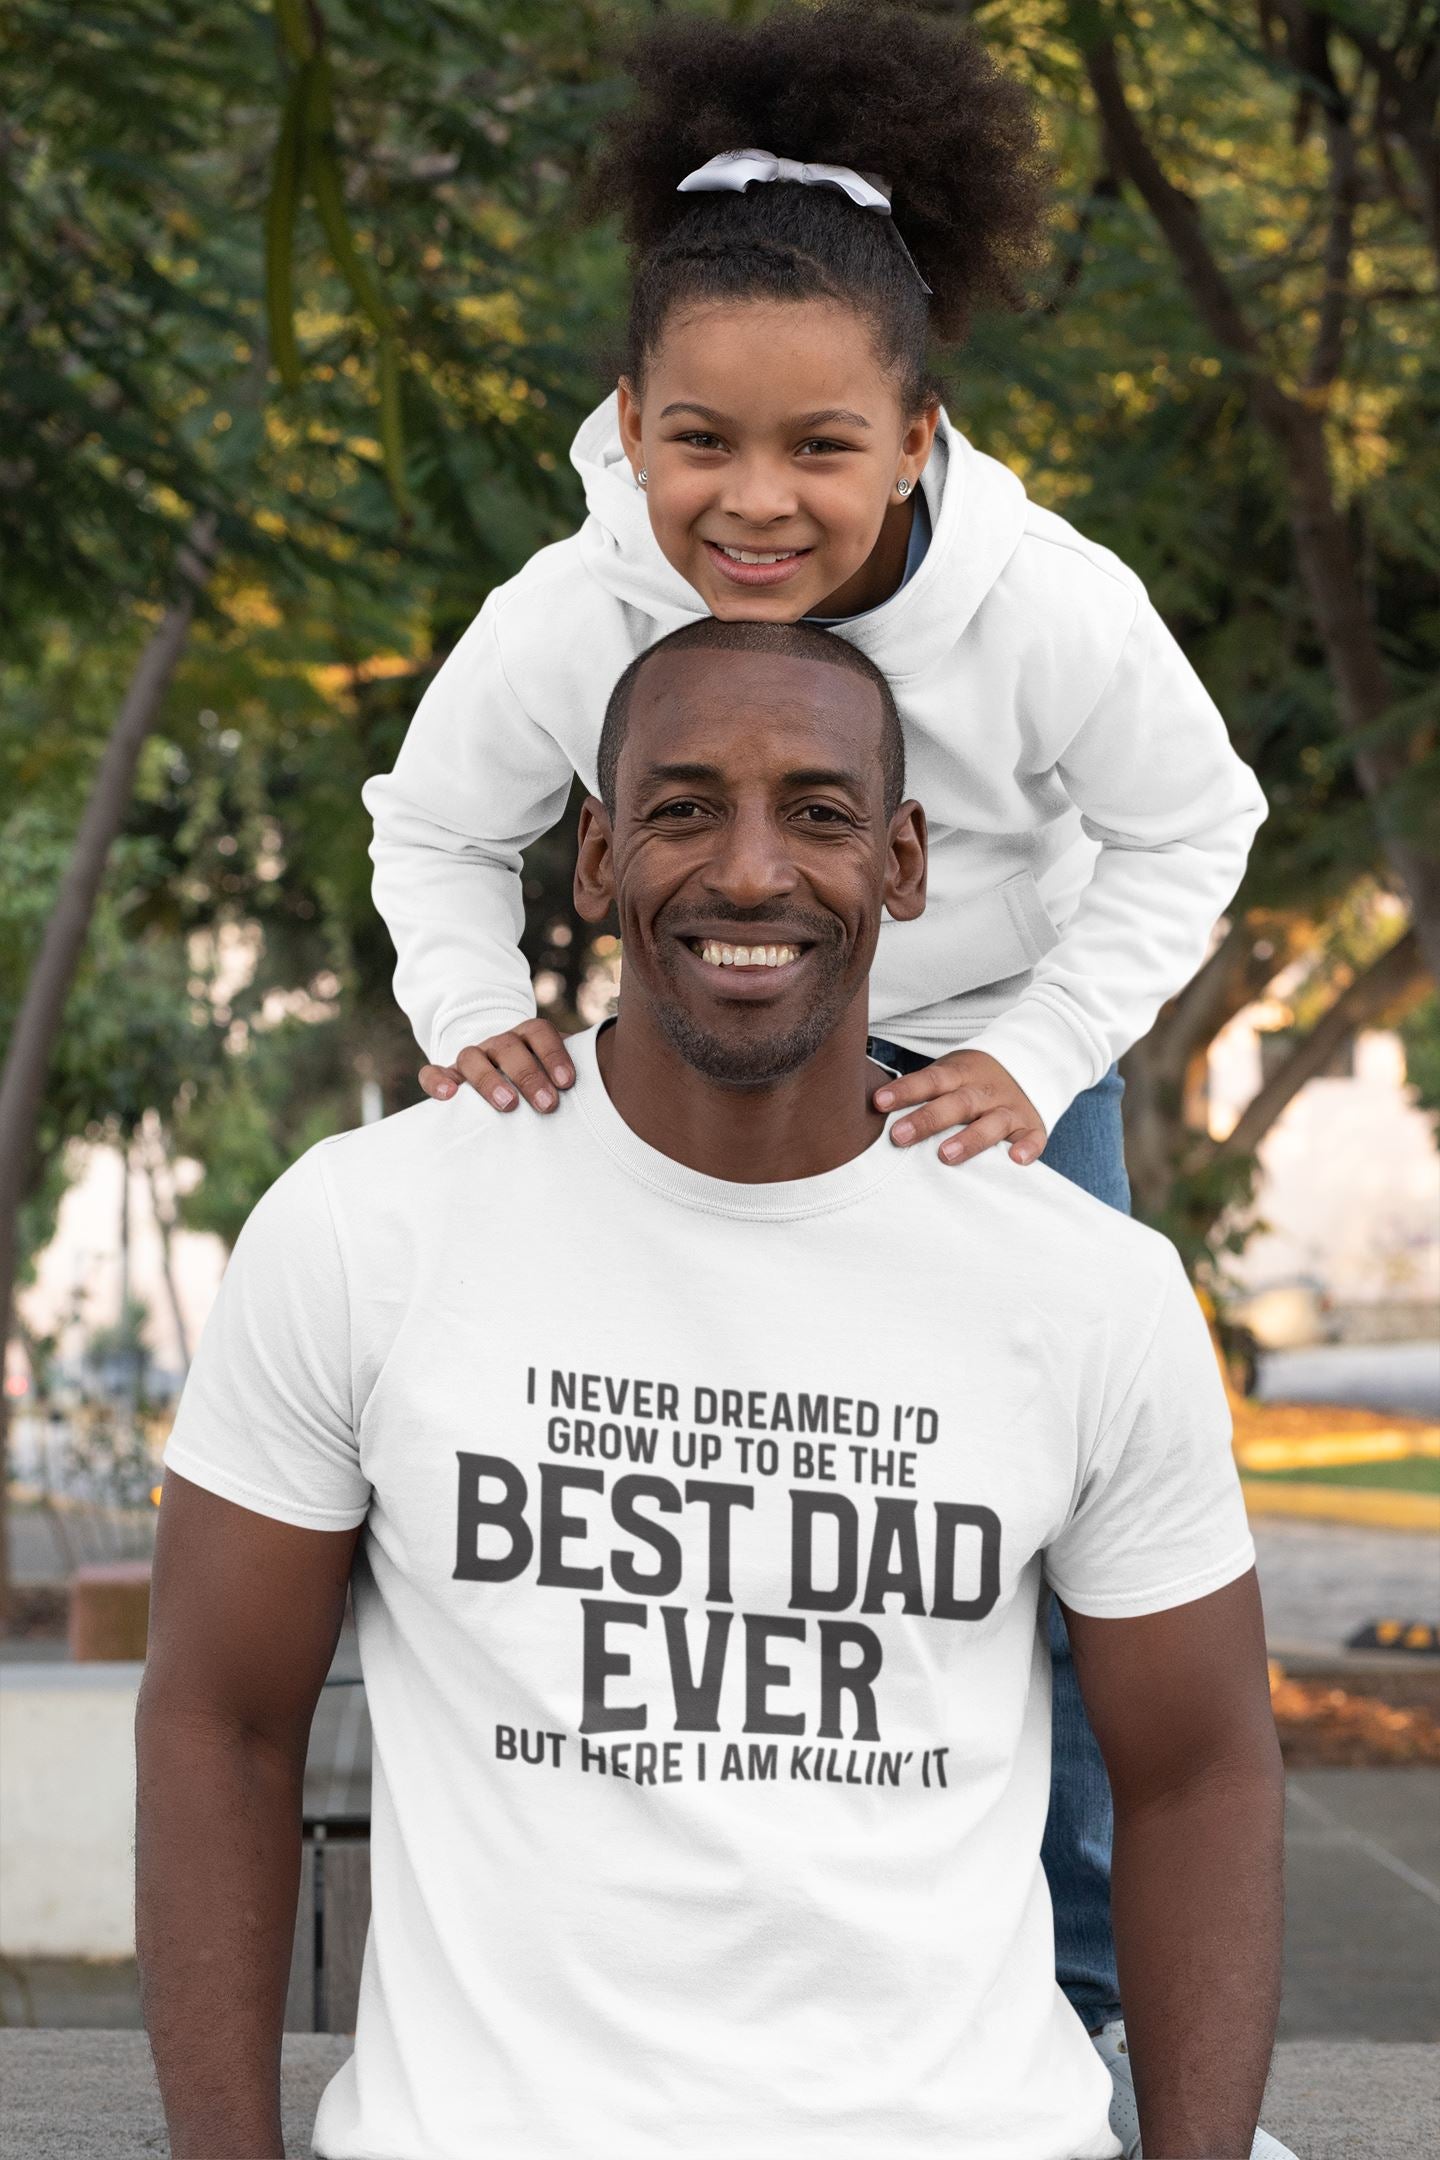 Fatherhood Themed T-Shirts, Father's Day Shirts, Husband, Daddy, Protector, Hero, Best Dad Ever, Dad Jokes B1ack By Design LLC Best Dad Ever S BLACK